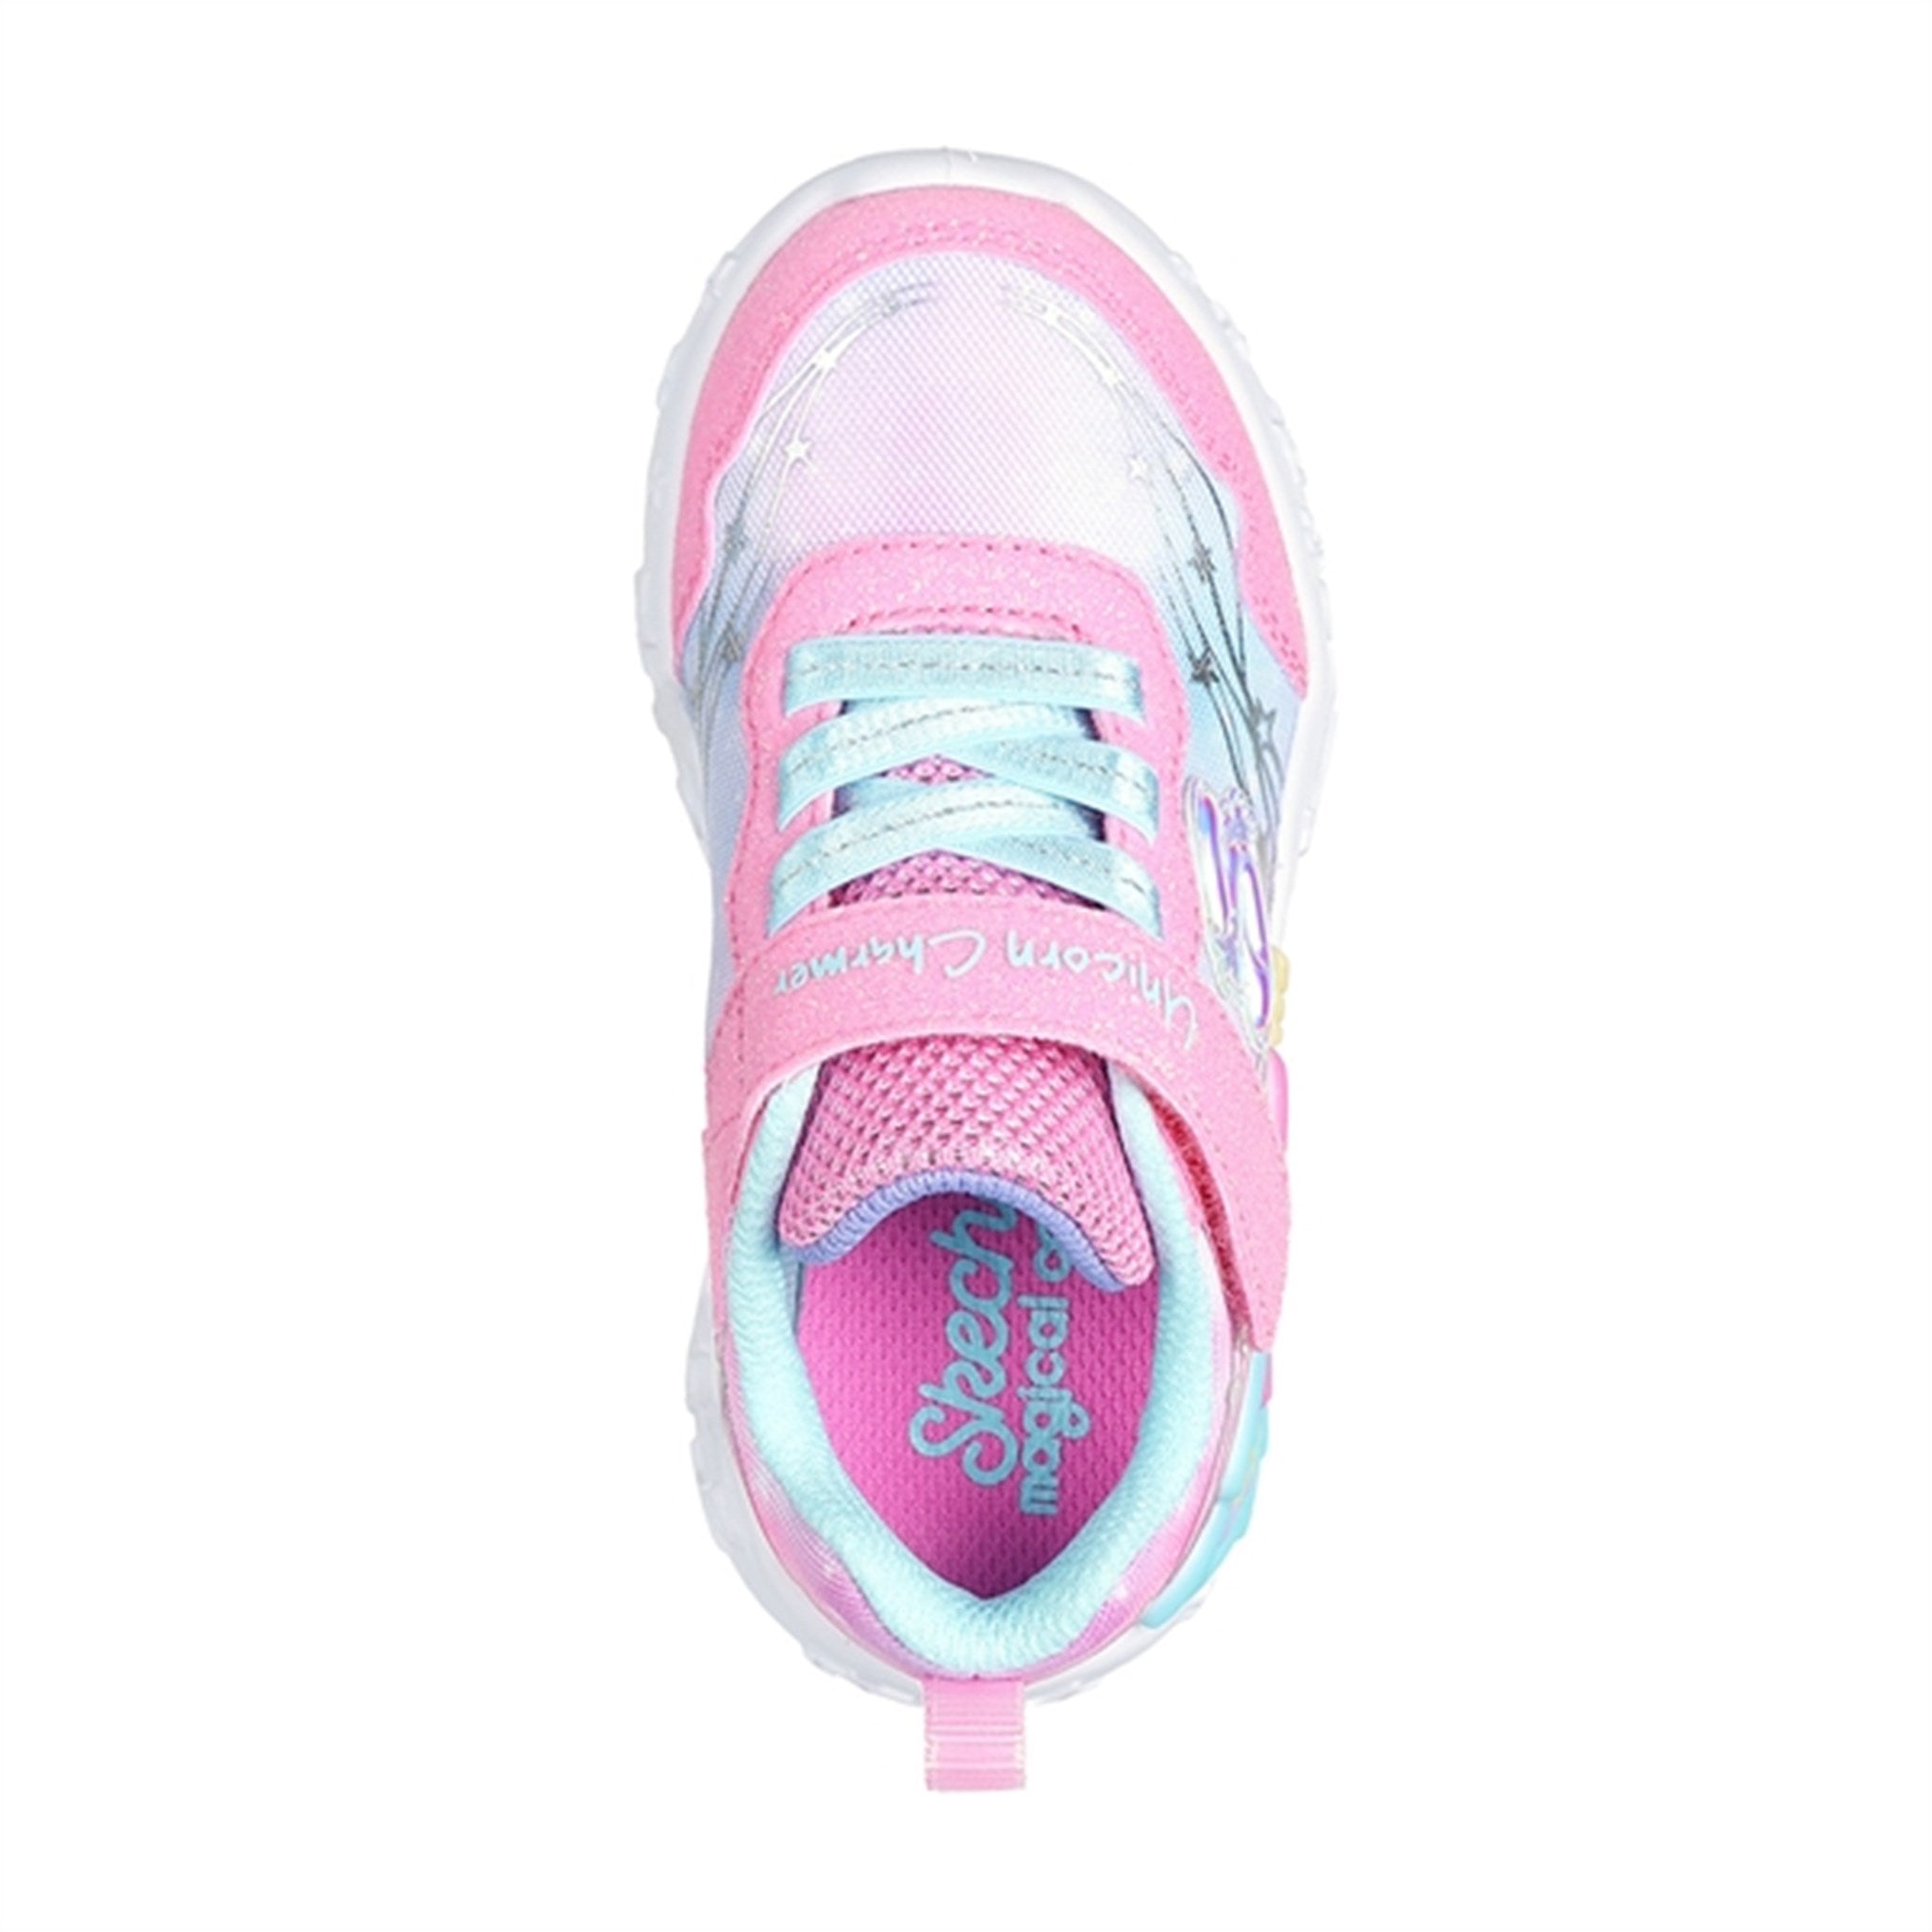 Skechers Unicorn Dreams Ombre Print & Star Shoe Pink Turquoise 4